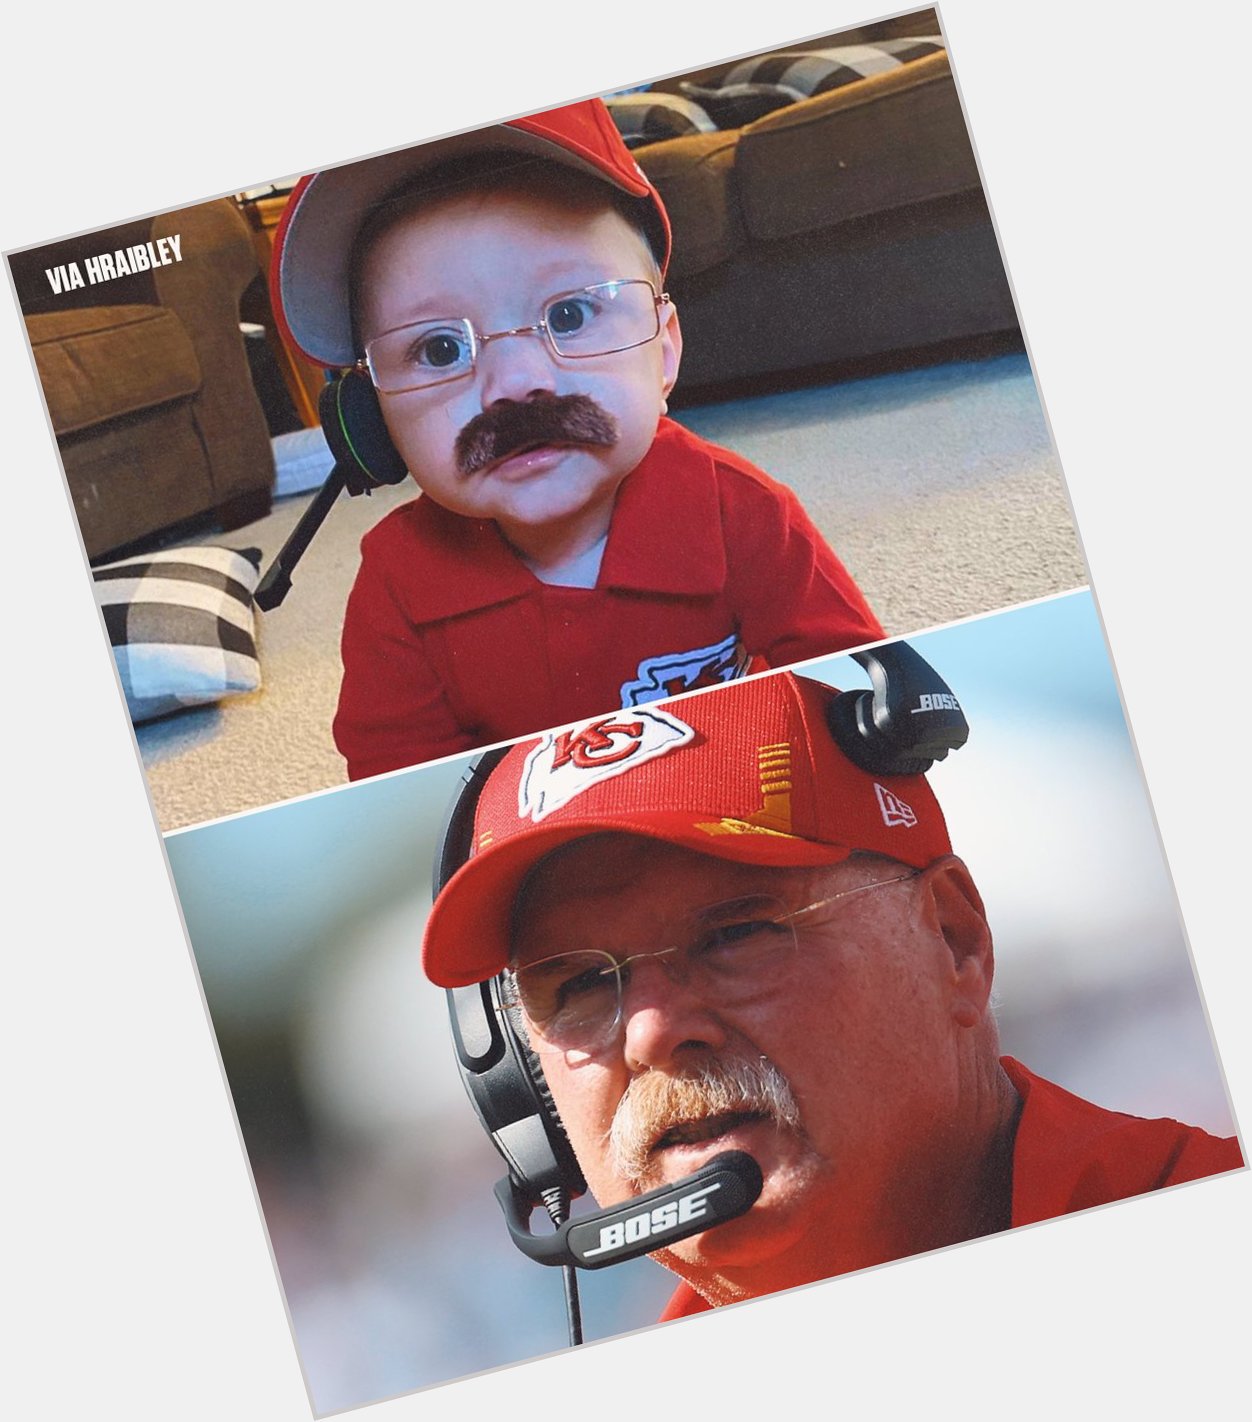 Everyone wants to be like Andy Reid.

Happy birthday Big Red.  